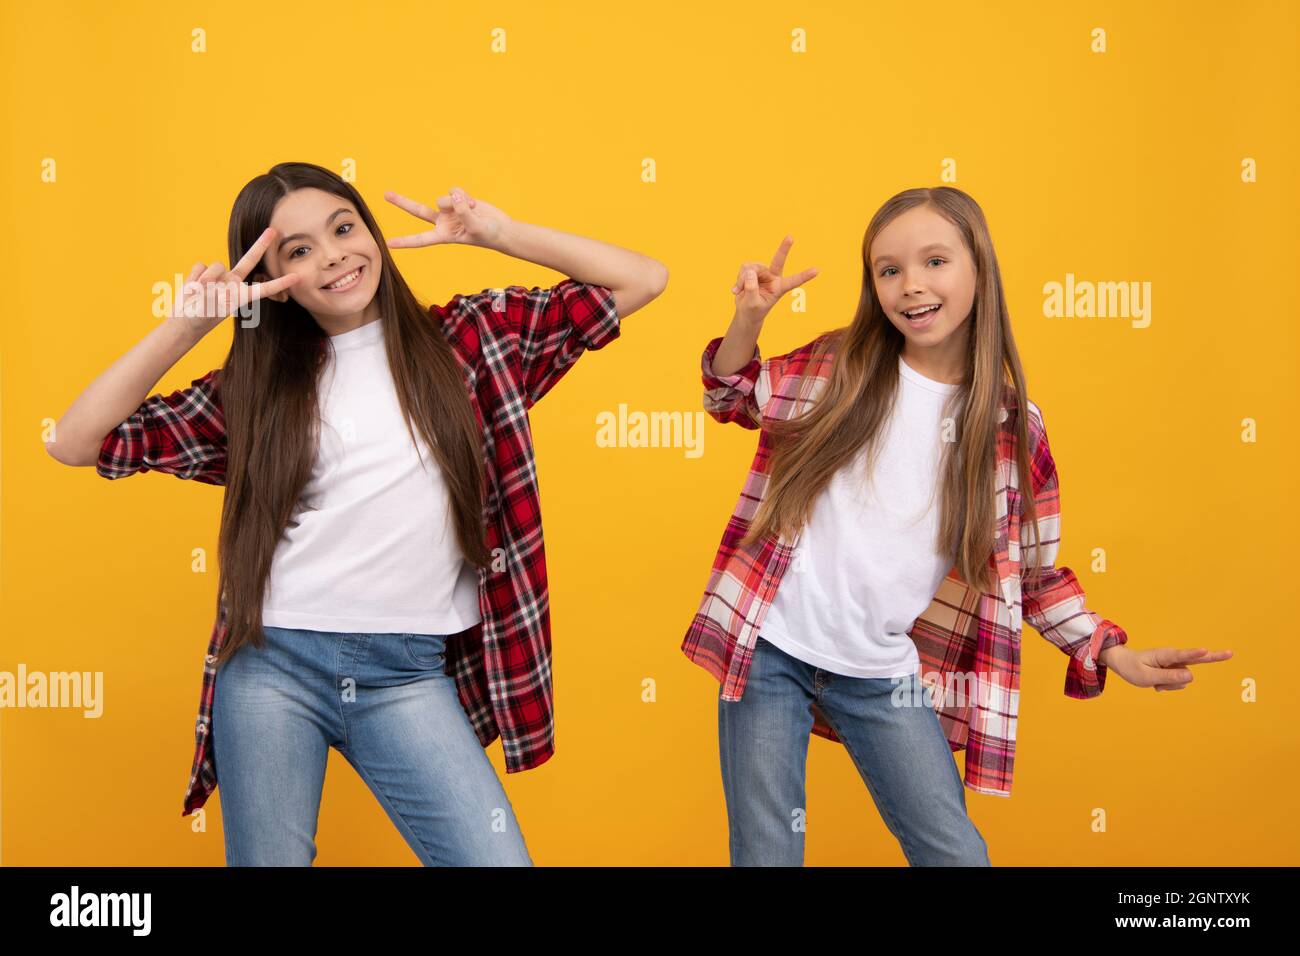 happy teen girls in casual shirt having fun showing peace gesture on yellow background, childhood. Stock Photo